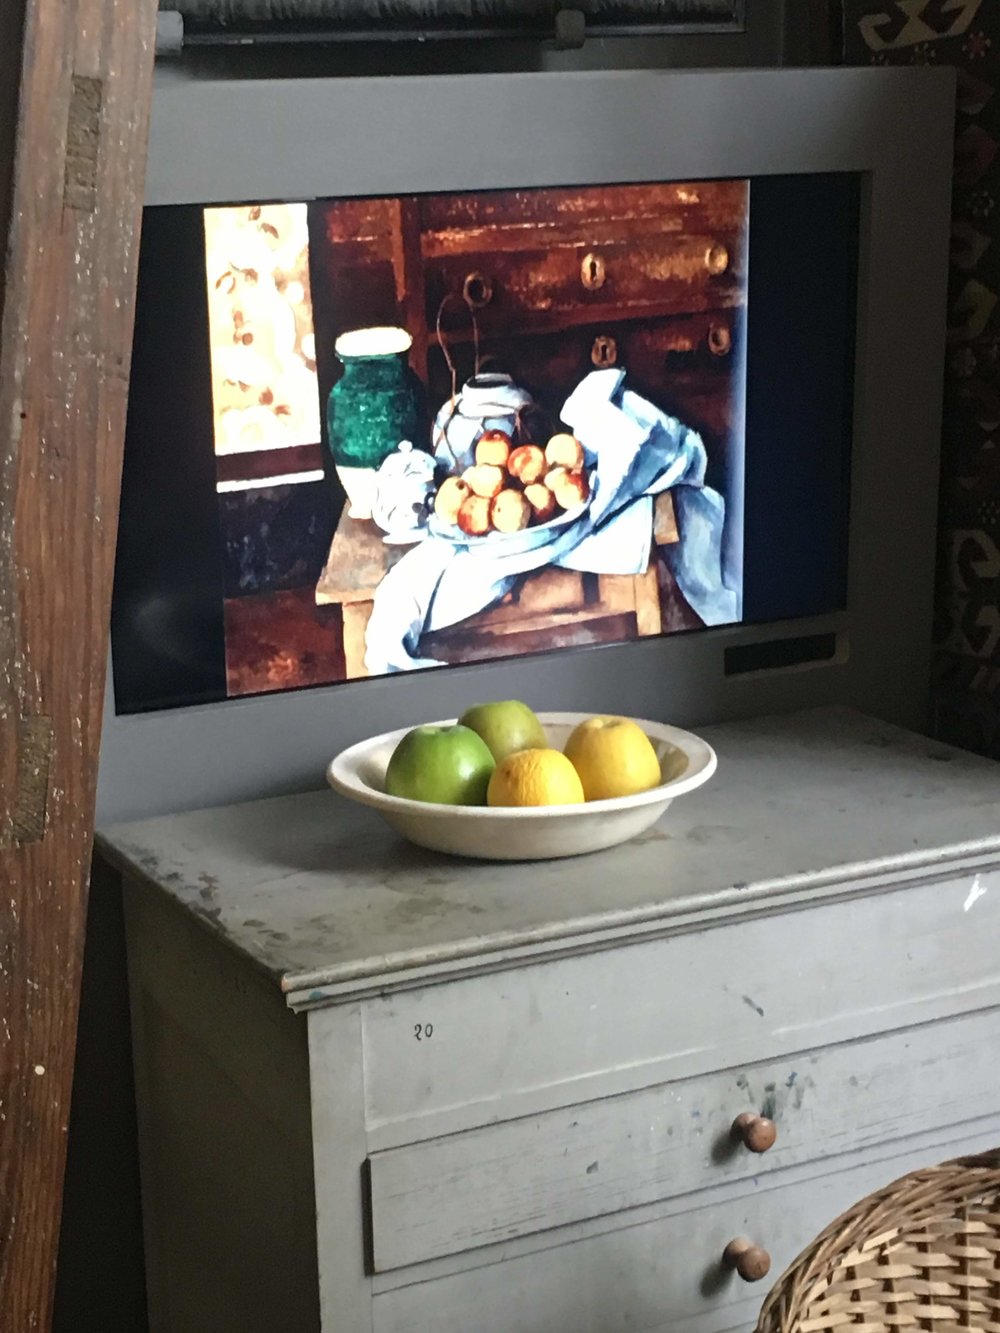 Even Cezanne didn't use bananas in his still lifes. Smart man!